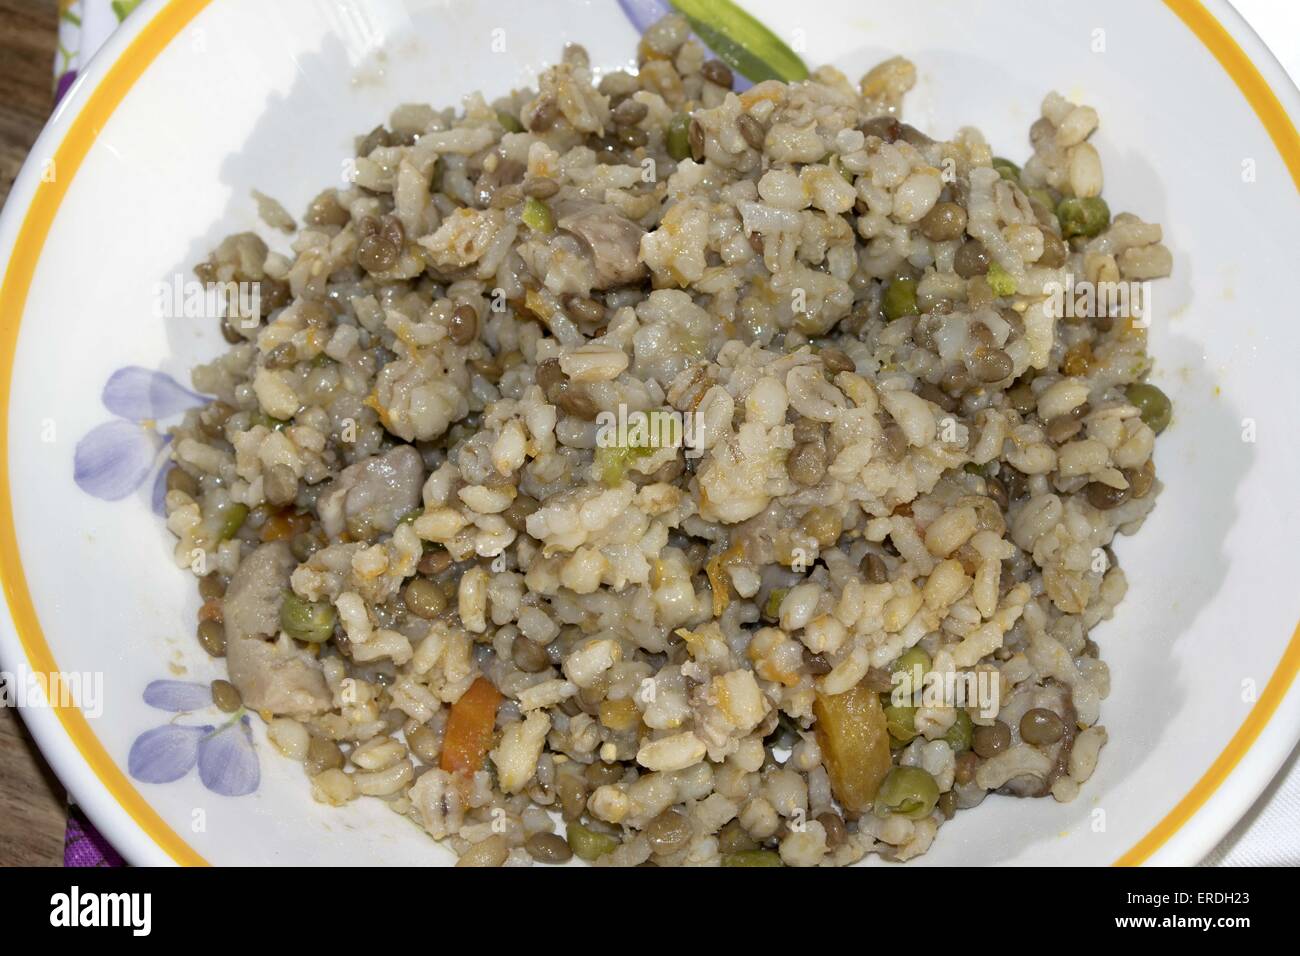 traditional vegetarian meal: soup of cereals Stock Photo